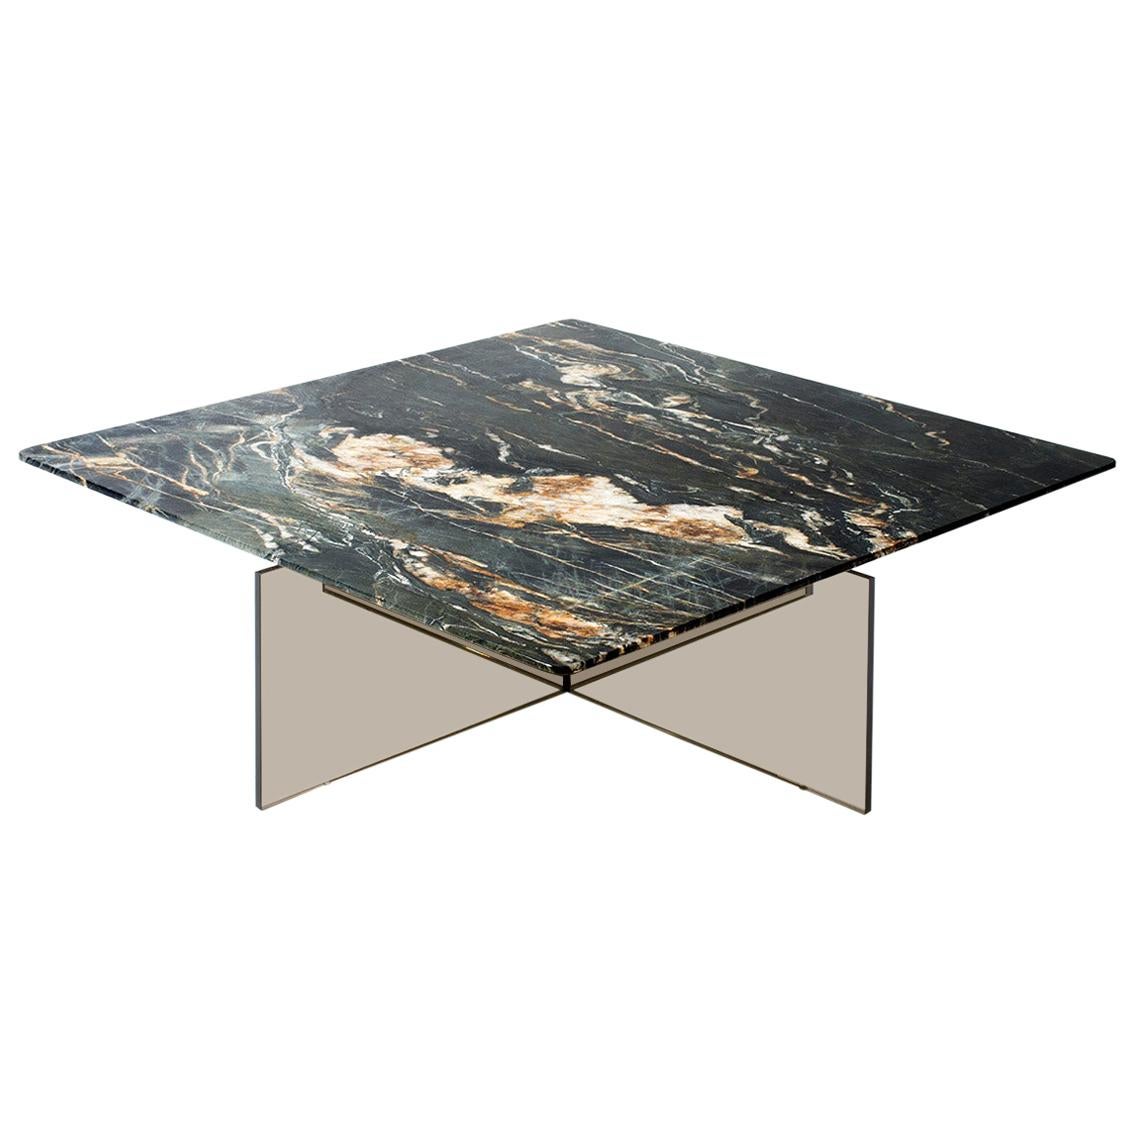 Claste beside Myself Small Coffee Table in Belvedere Black Marble & Glass Base For Sale